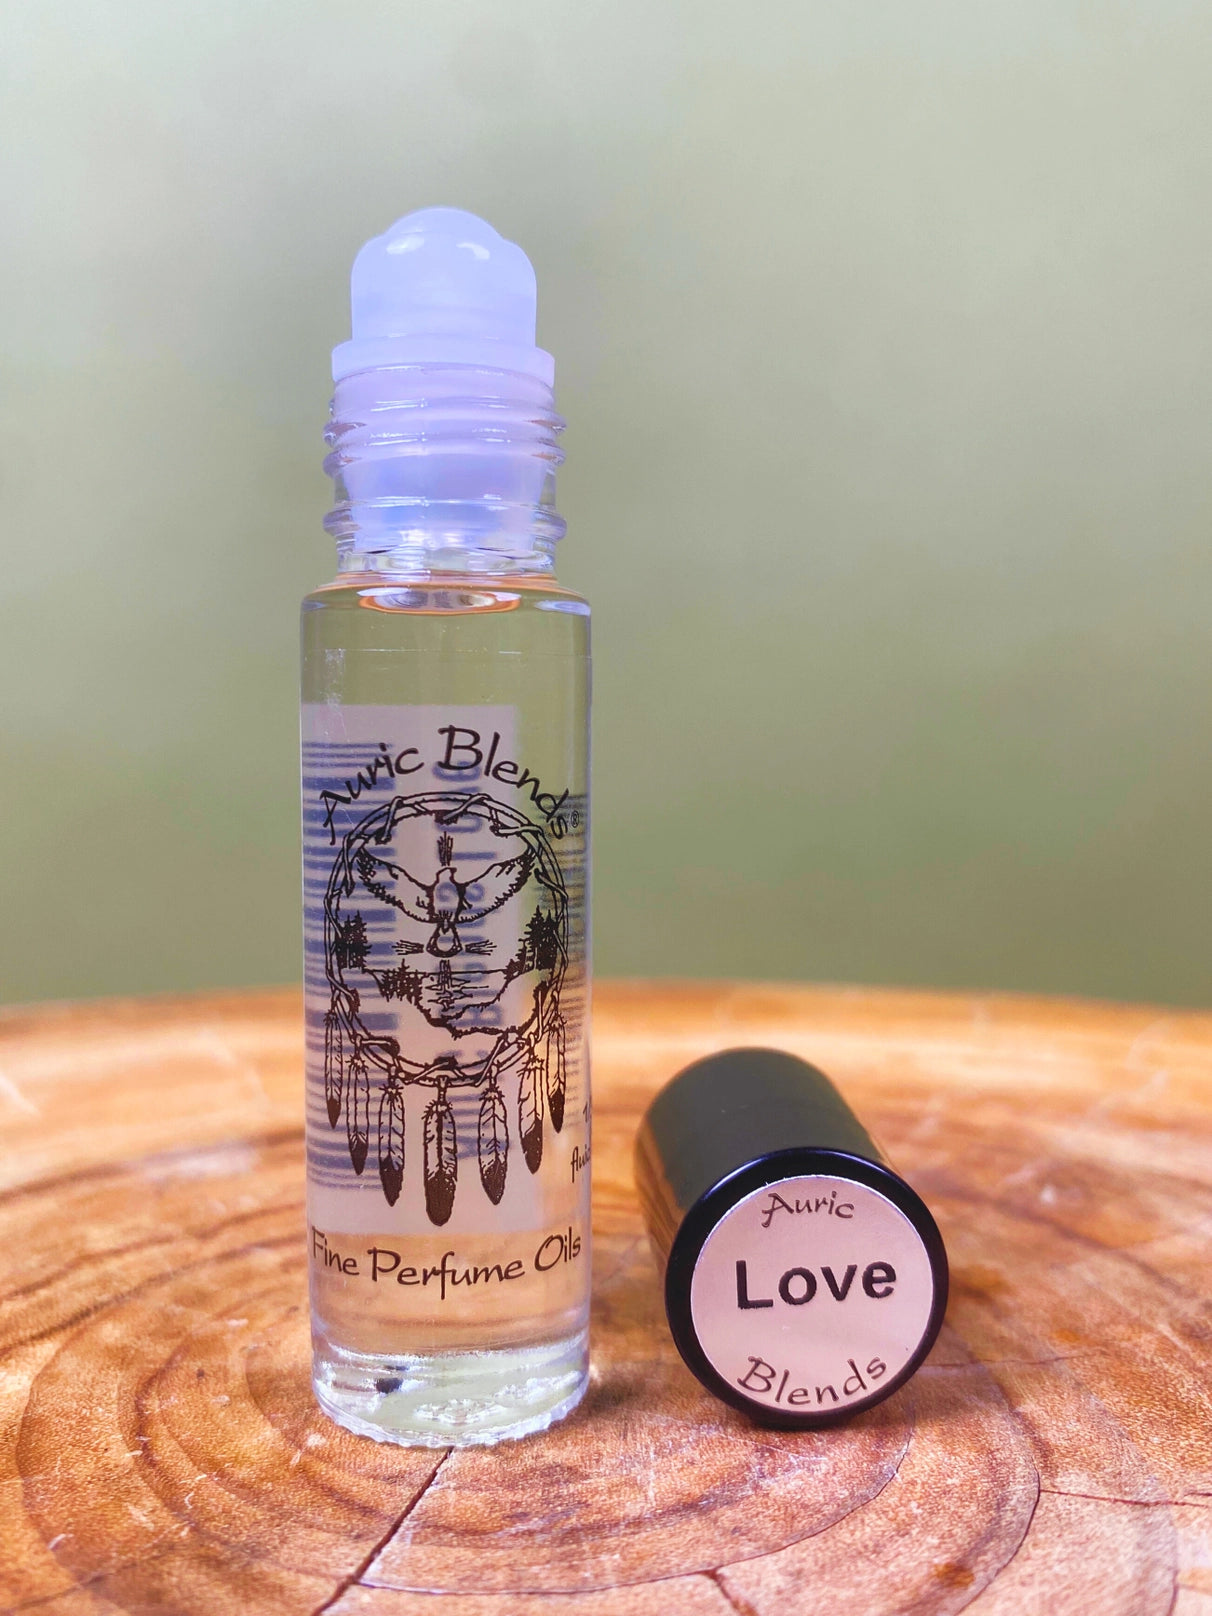 Love Roll-On Perfume Oil by Auric Blends - Moon Room Shop and Wellness